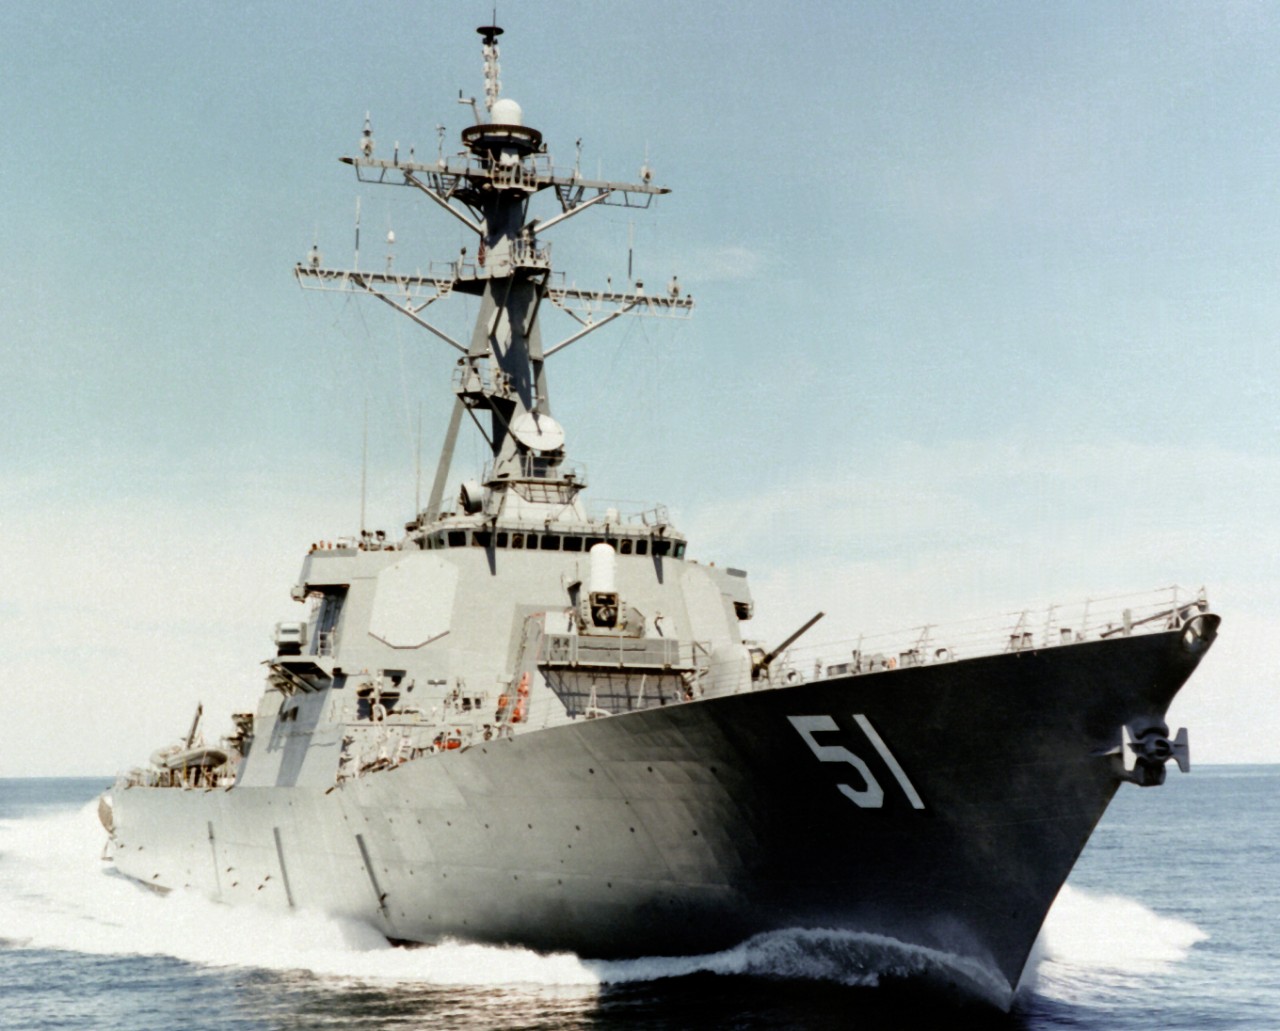 330-CFD-DN-SC-91-10732:    USS Arleigh Burke (DDG-51), 1991.  Starboard bow view of the guided-missile destroyer underway off the coast of New England prior to its commissioning, June 22, 1991.  Photographed by Bath Iron Works Corporation.  Official U.S. Navy Photograph, now in the collections of the National Archives.   